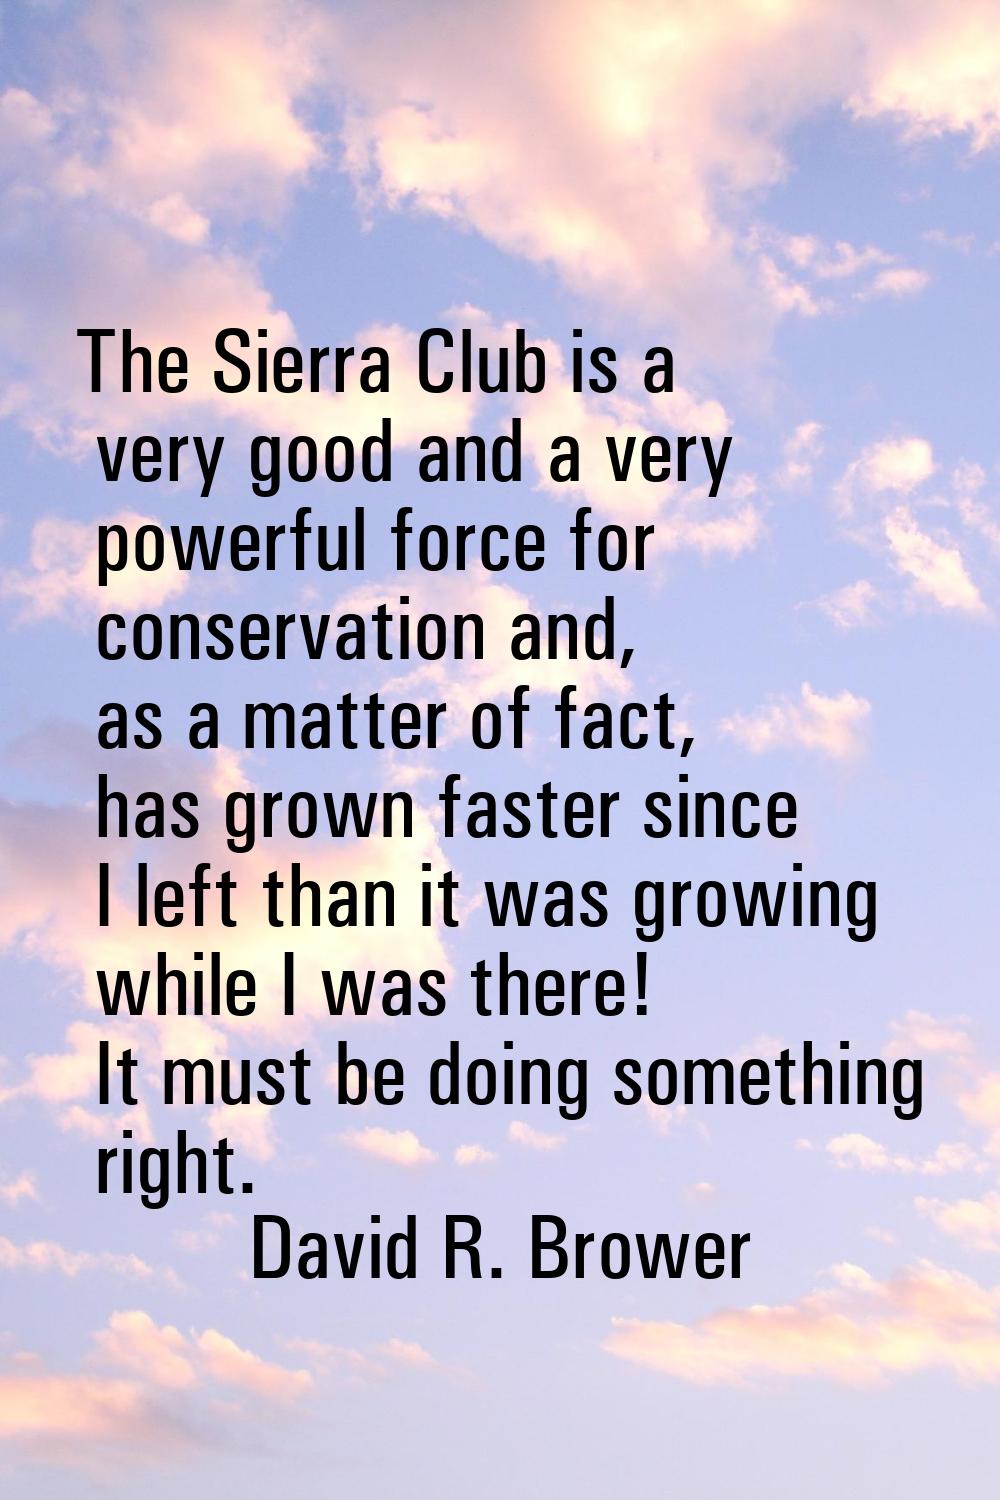 The Sierra Club is a very good and a very powerful force for conservation and, as a matter of fact,